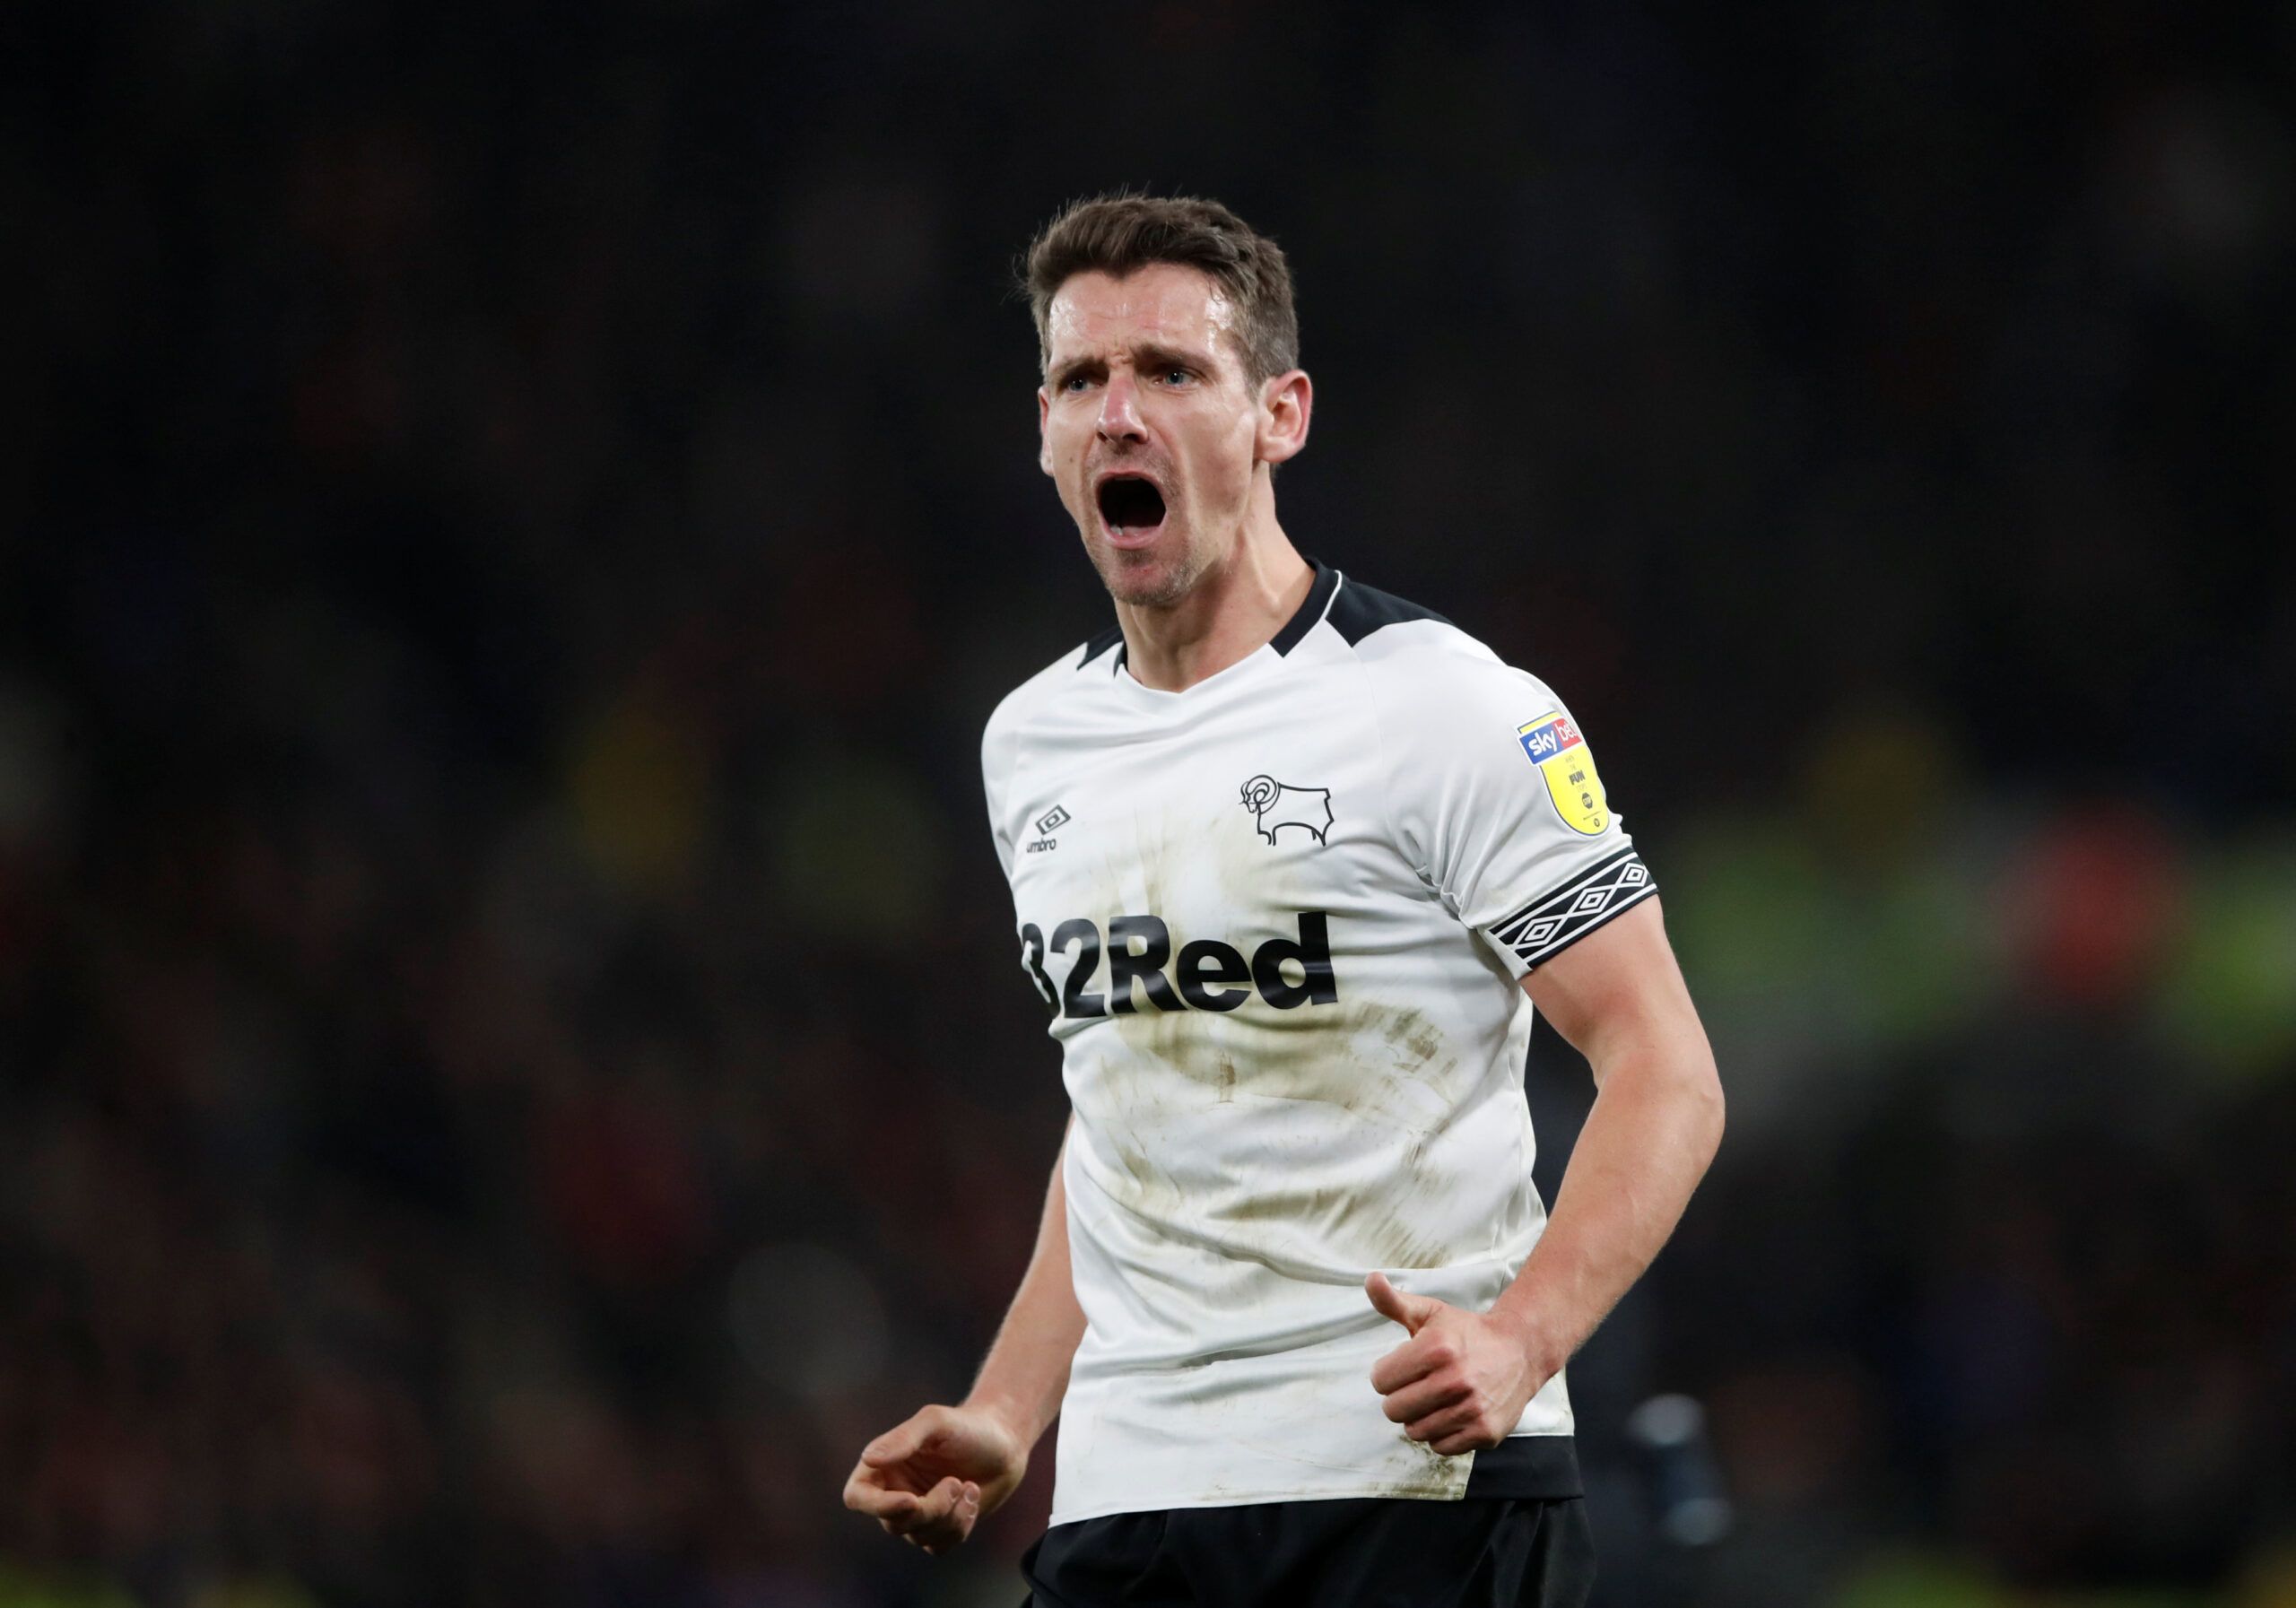 Soccer Football - Championship - Derby County v Nottingham Forest - Pride Park, Derby, Britain - December 17, 2018   Derby County's Craig Bryson reacts   Action Images/Carl Recine    EDITORIAL USE ONLY. No use with unauthorized audio, video, data, fixture lists, club/league logos or 